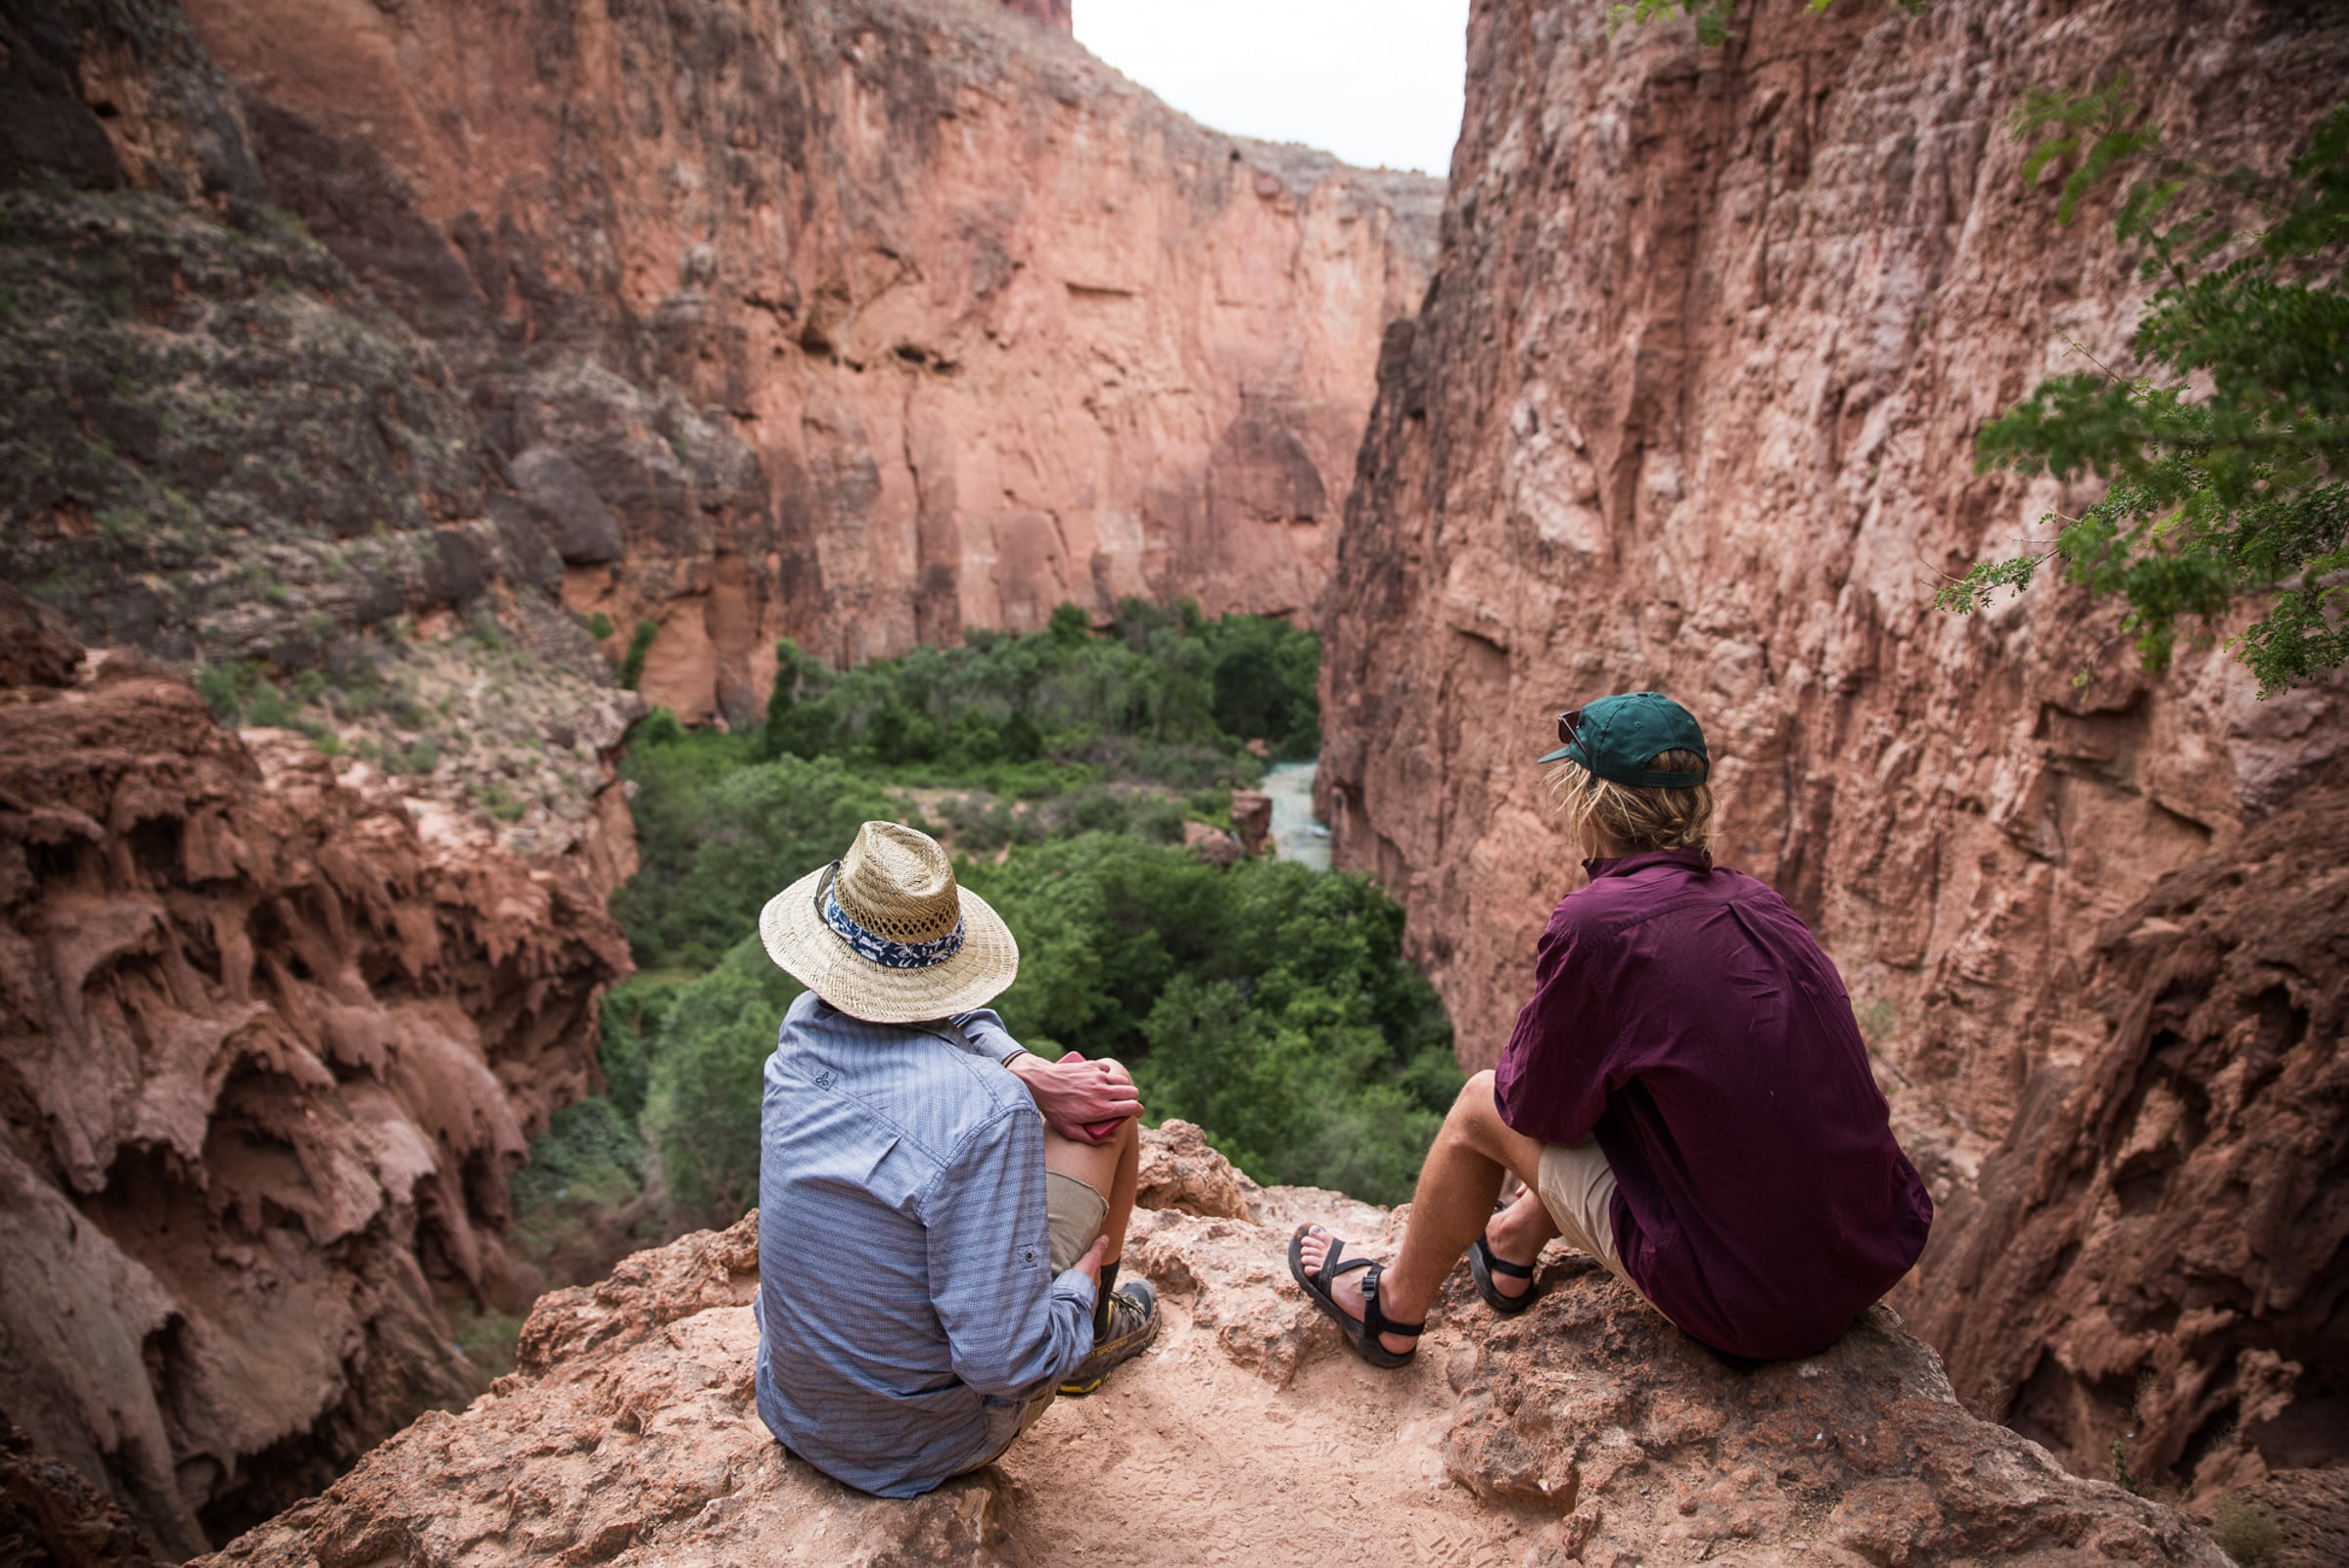 Two people sit on rock overlooking a canyon.